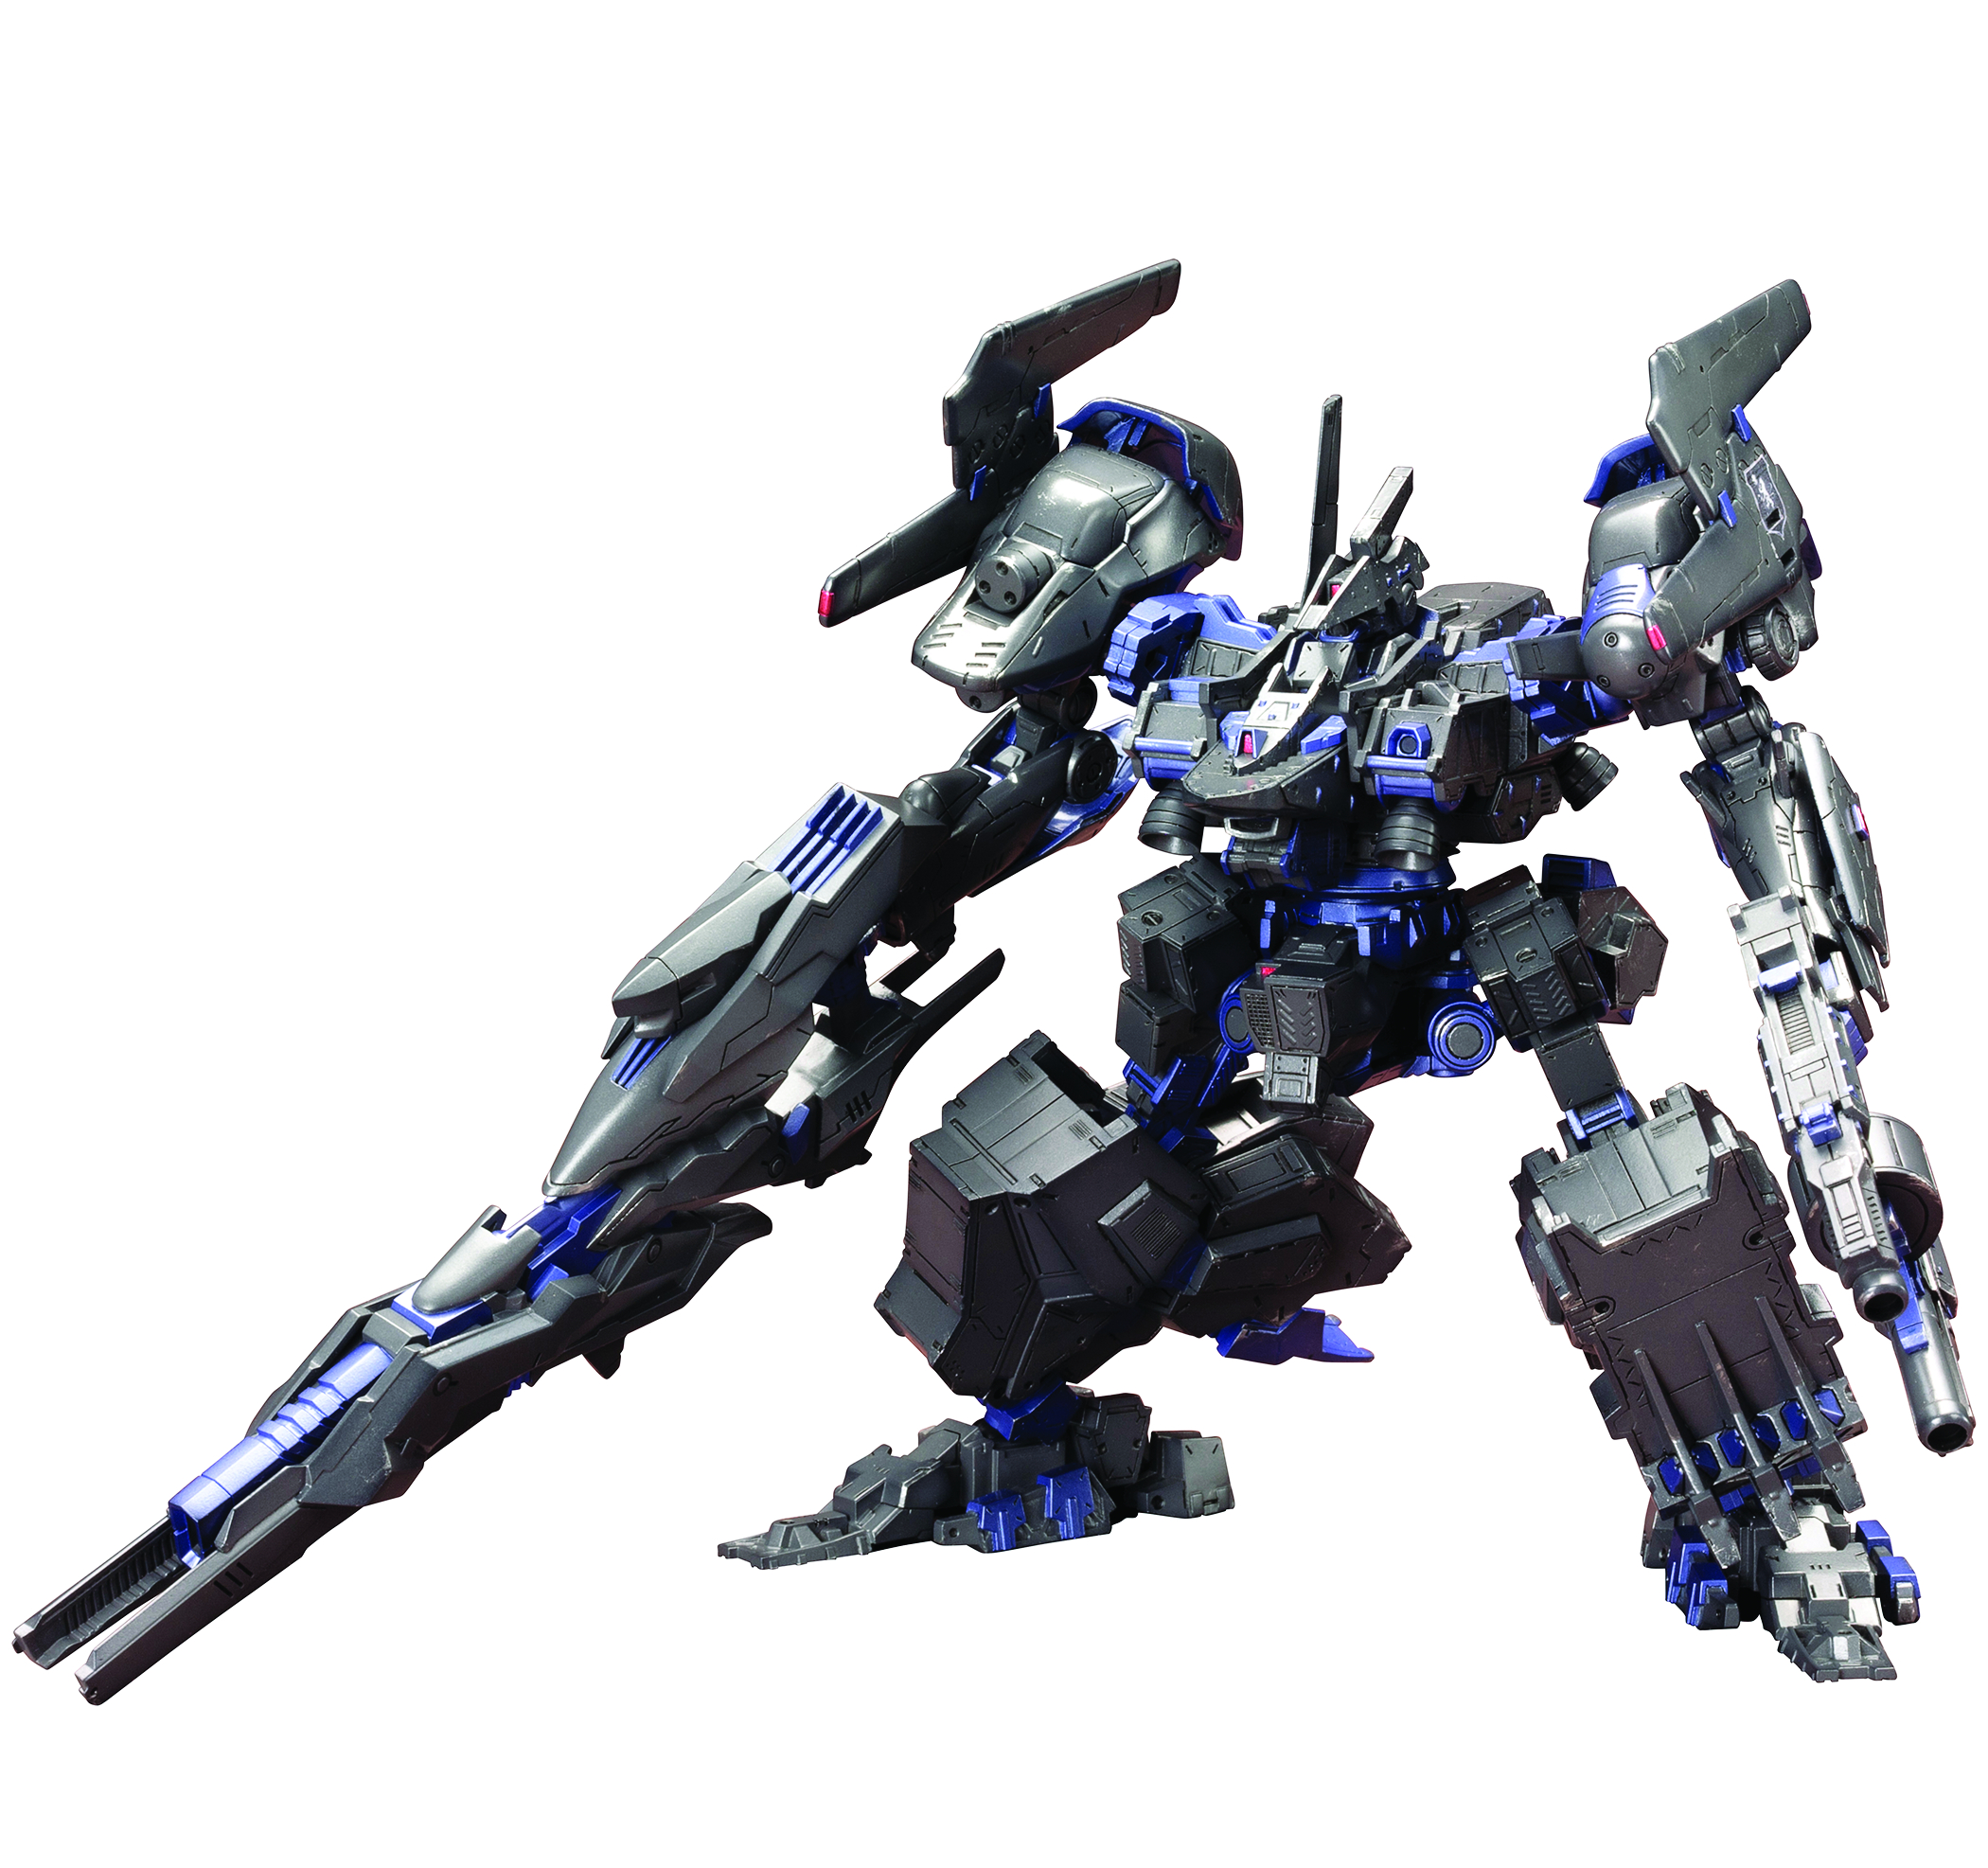 So I decided to mess around with some Armored Core 3 Models today